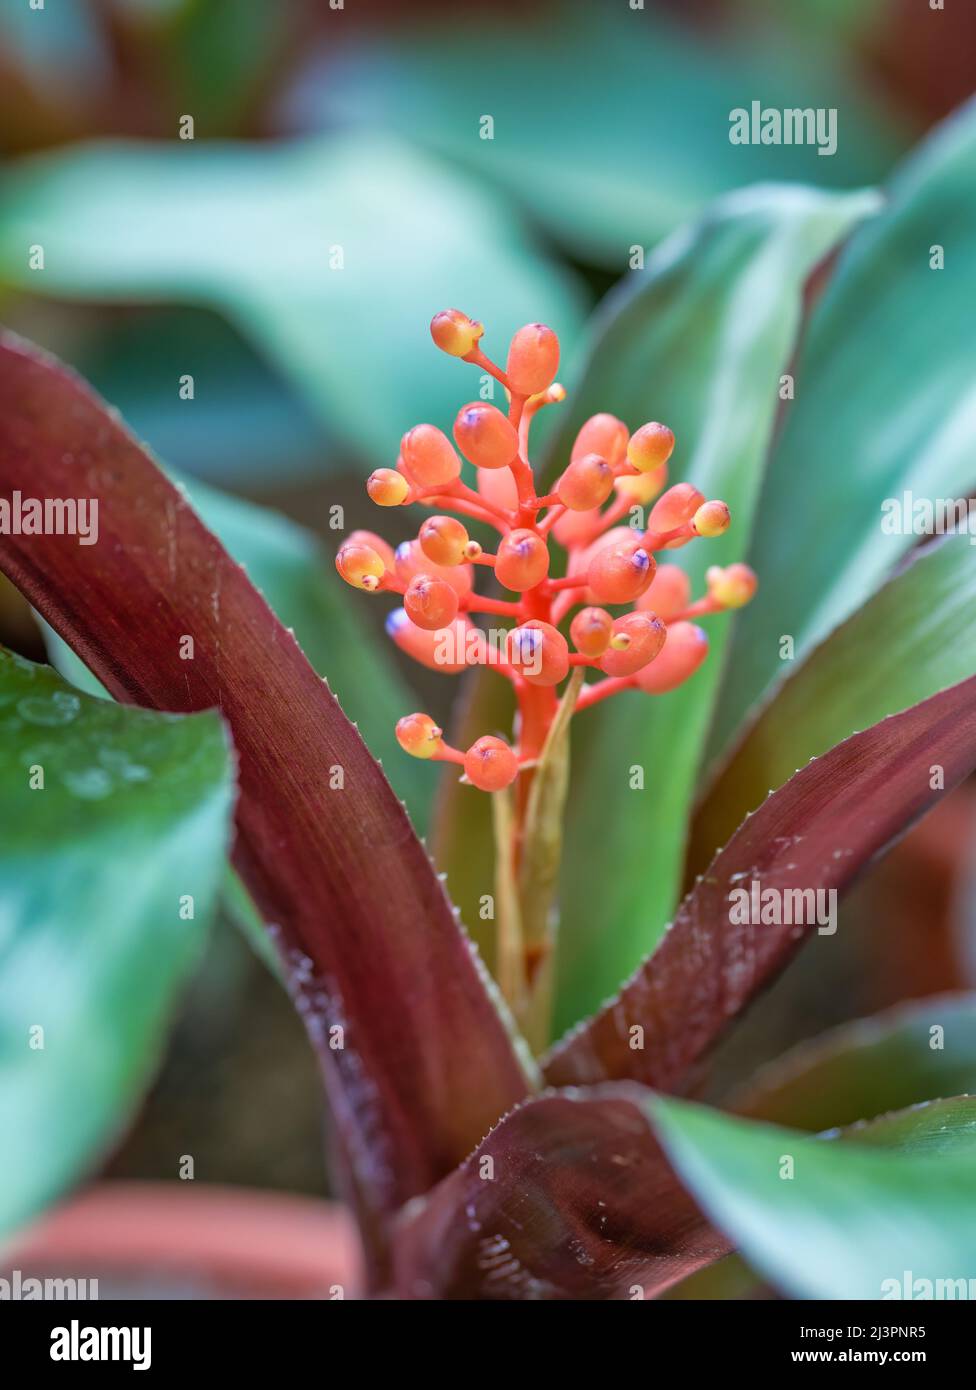 Close up detail with Aechmea miniata red small flower, part of Bromeliaceae family Stock Photo